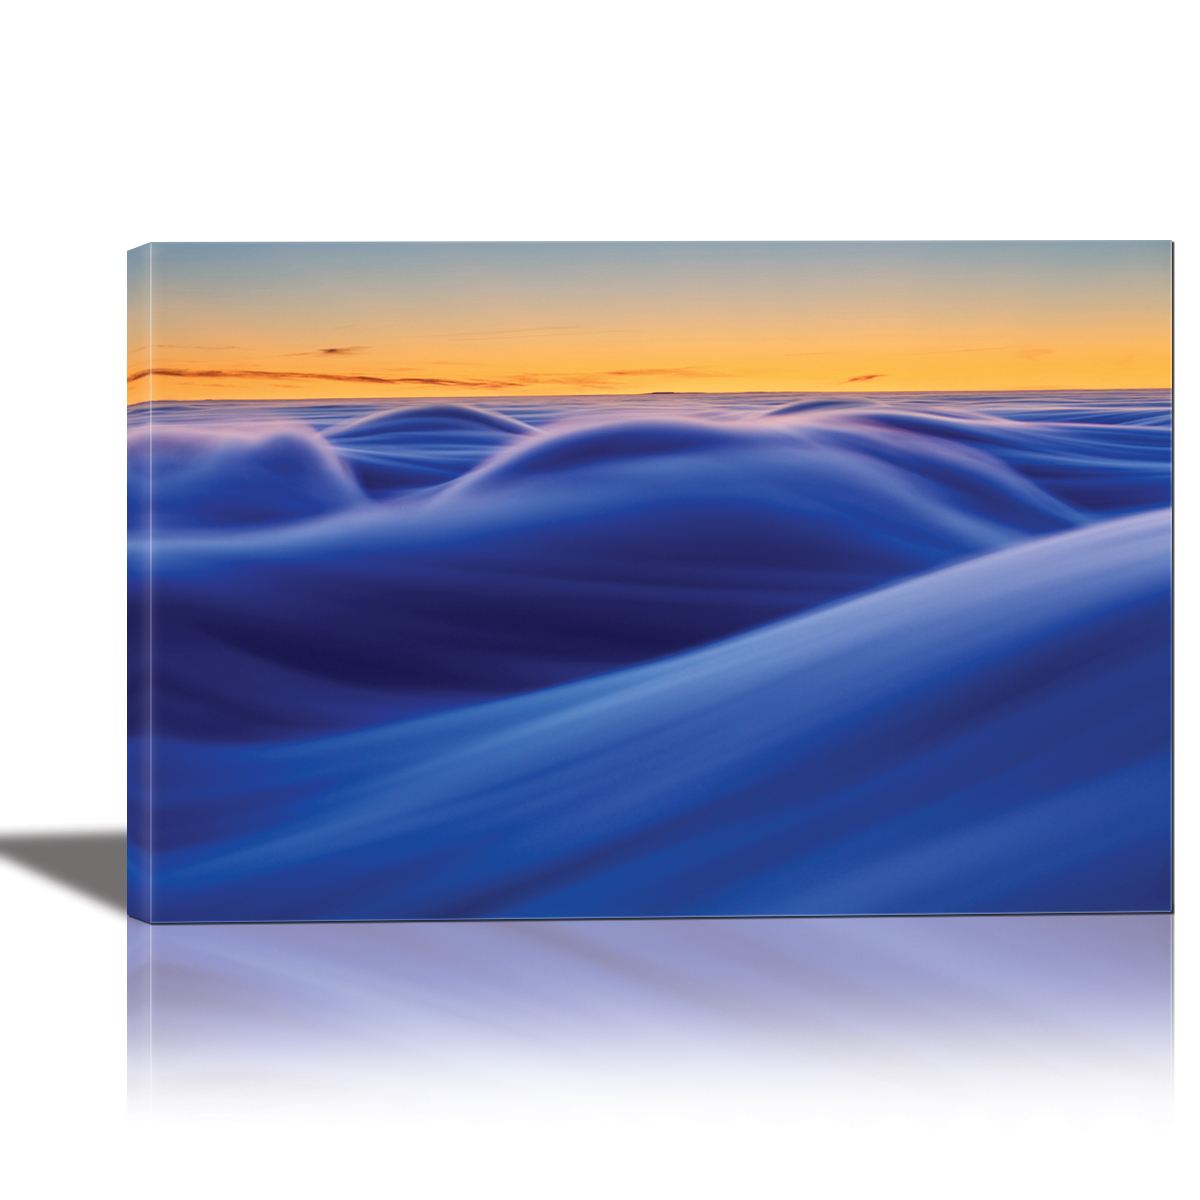 1751-94137 24 X 36 In. Waves Painting Artwork For Home Decor Framed Canvas Wall Art - Multi Color